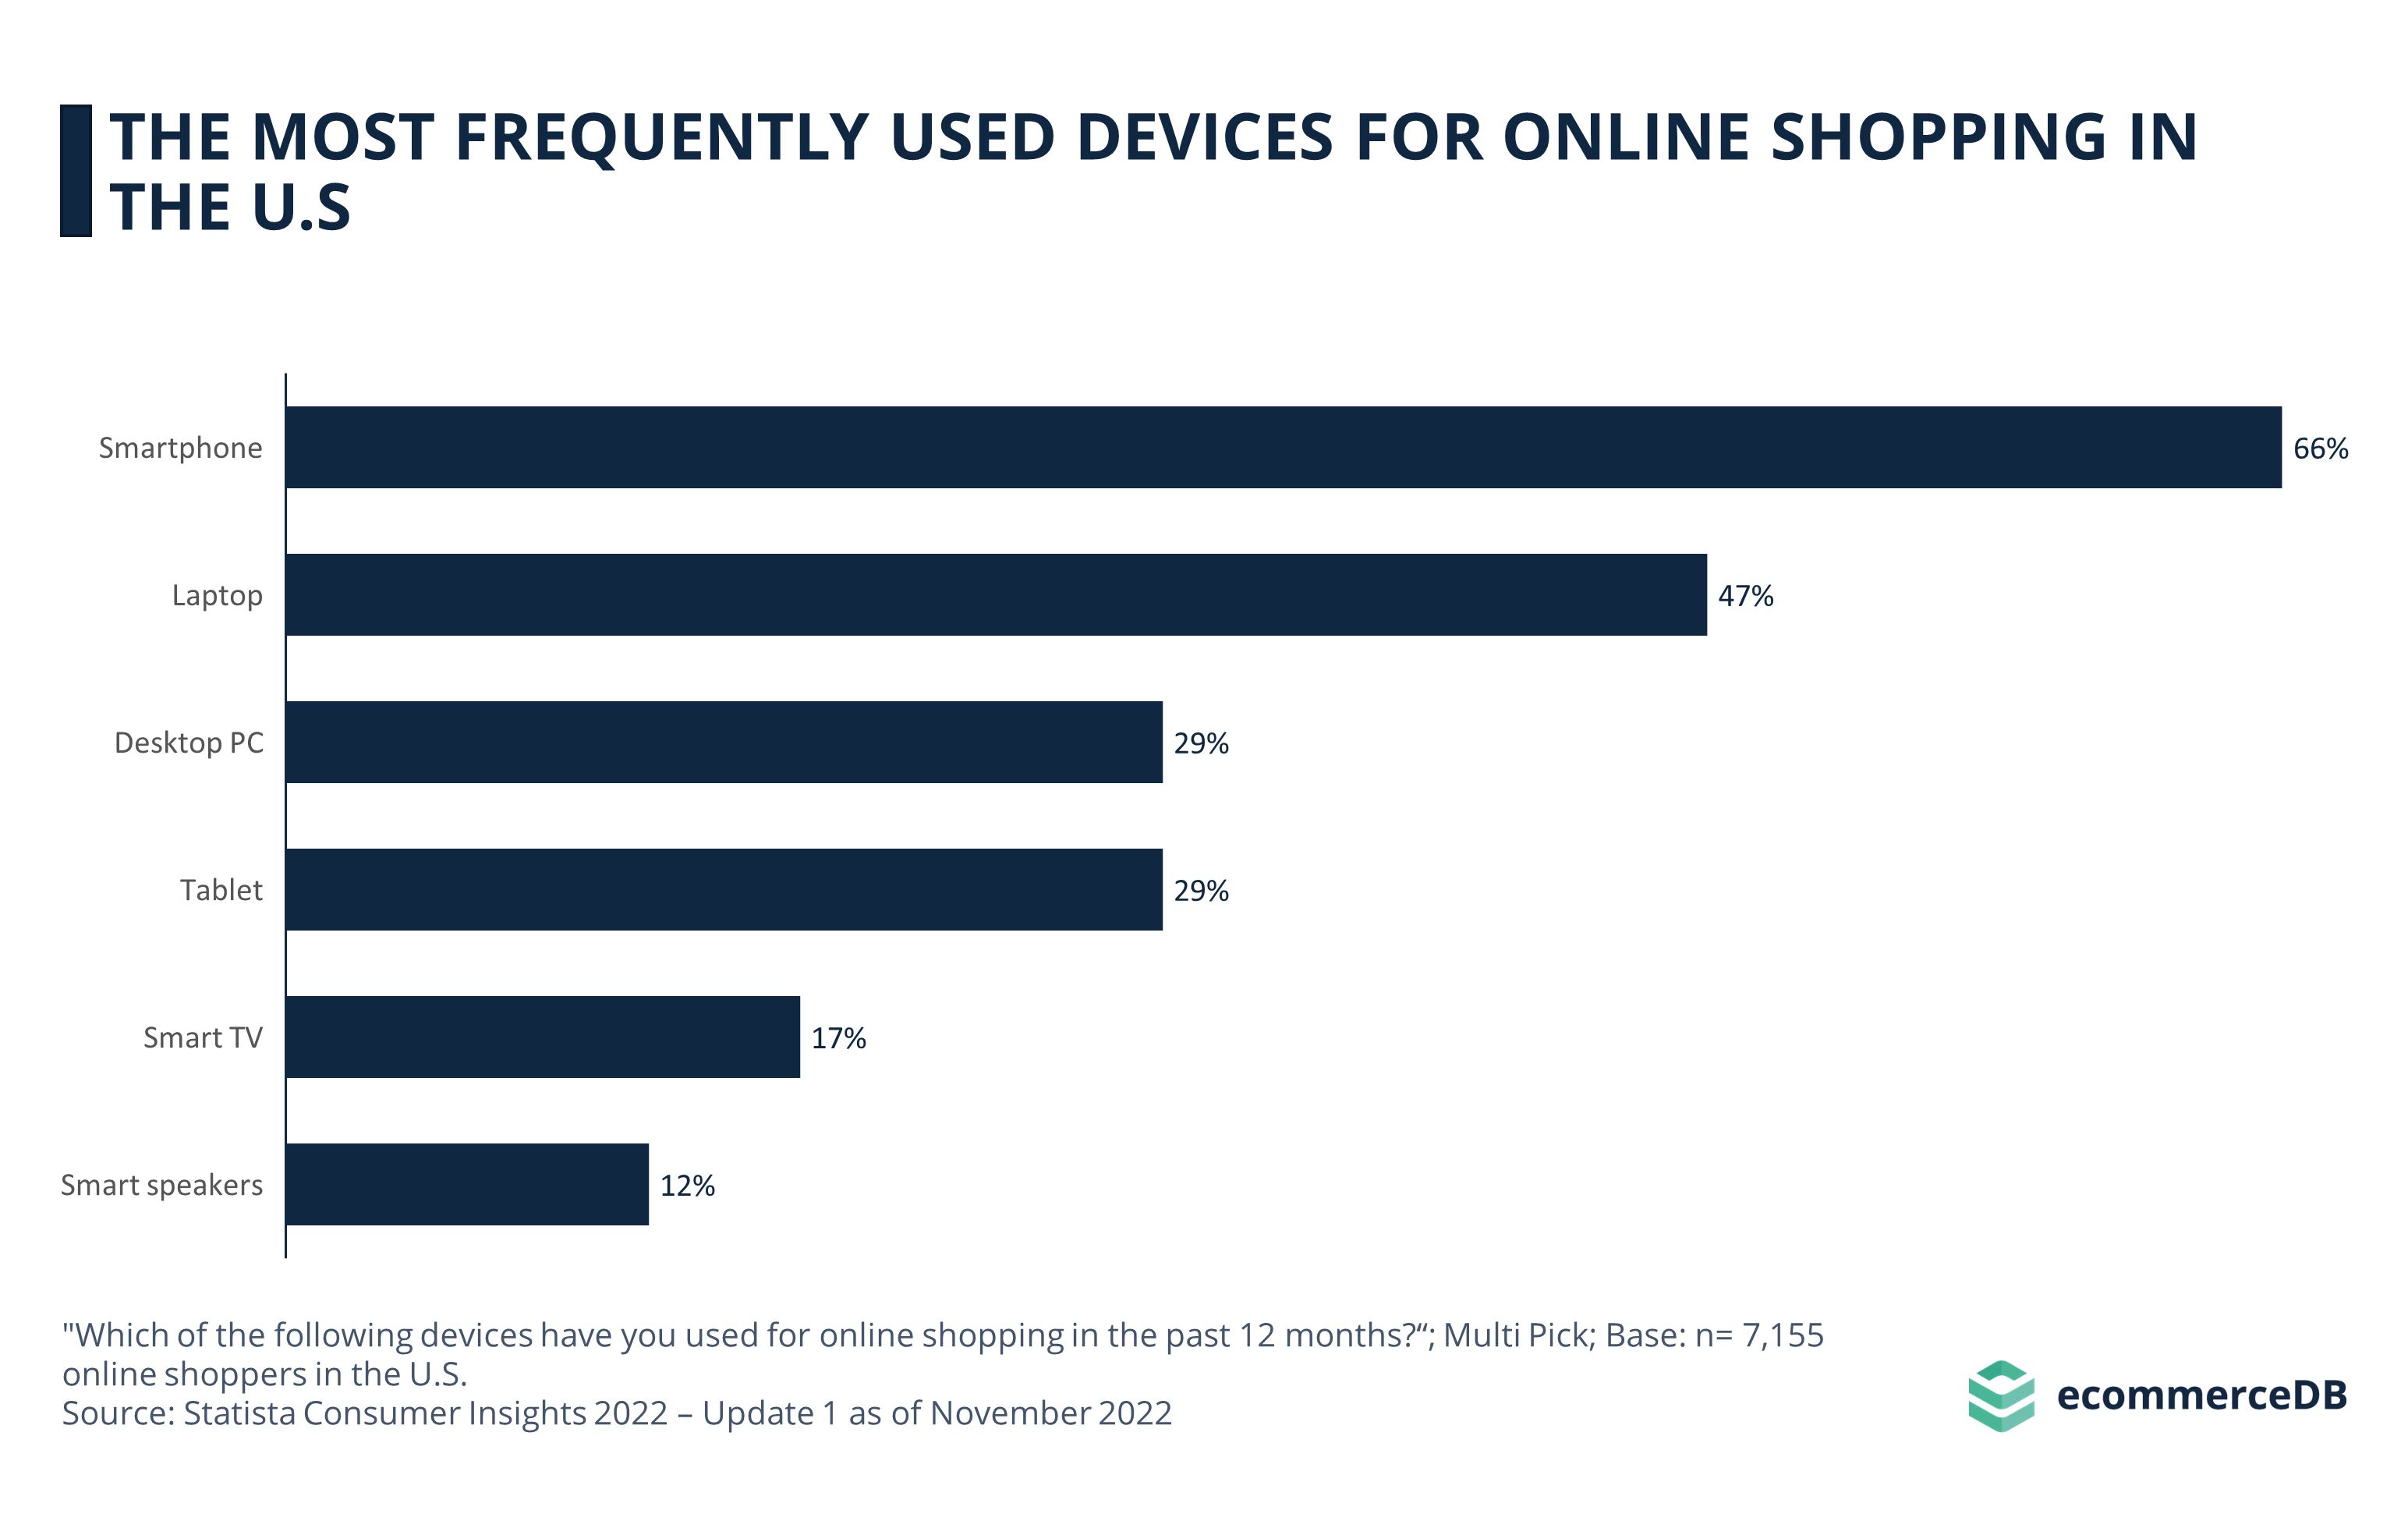 The Most Frequently Used Devices for Online Shopping in the U.S.